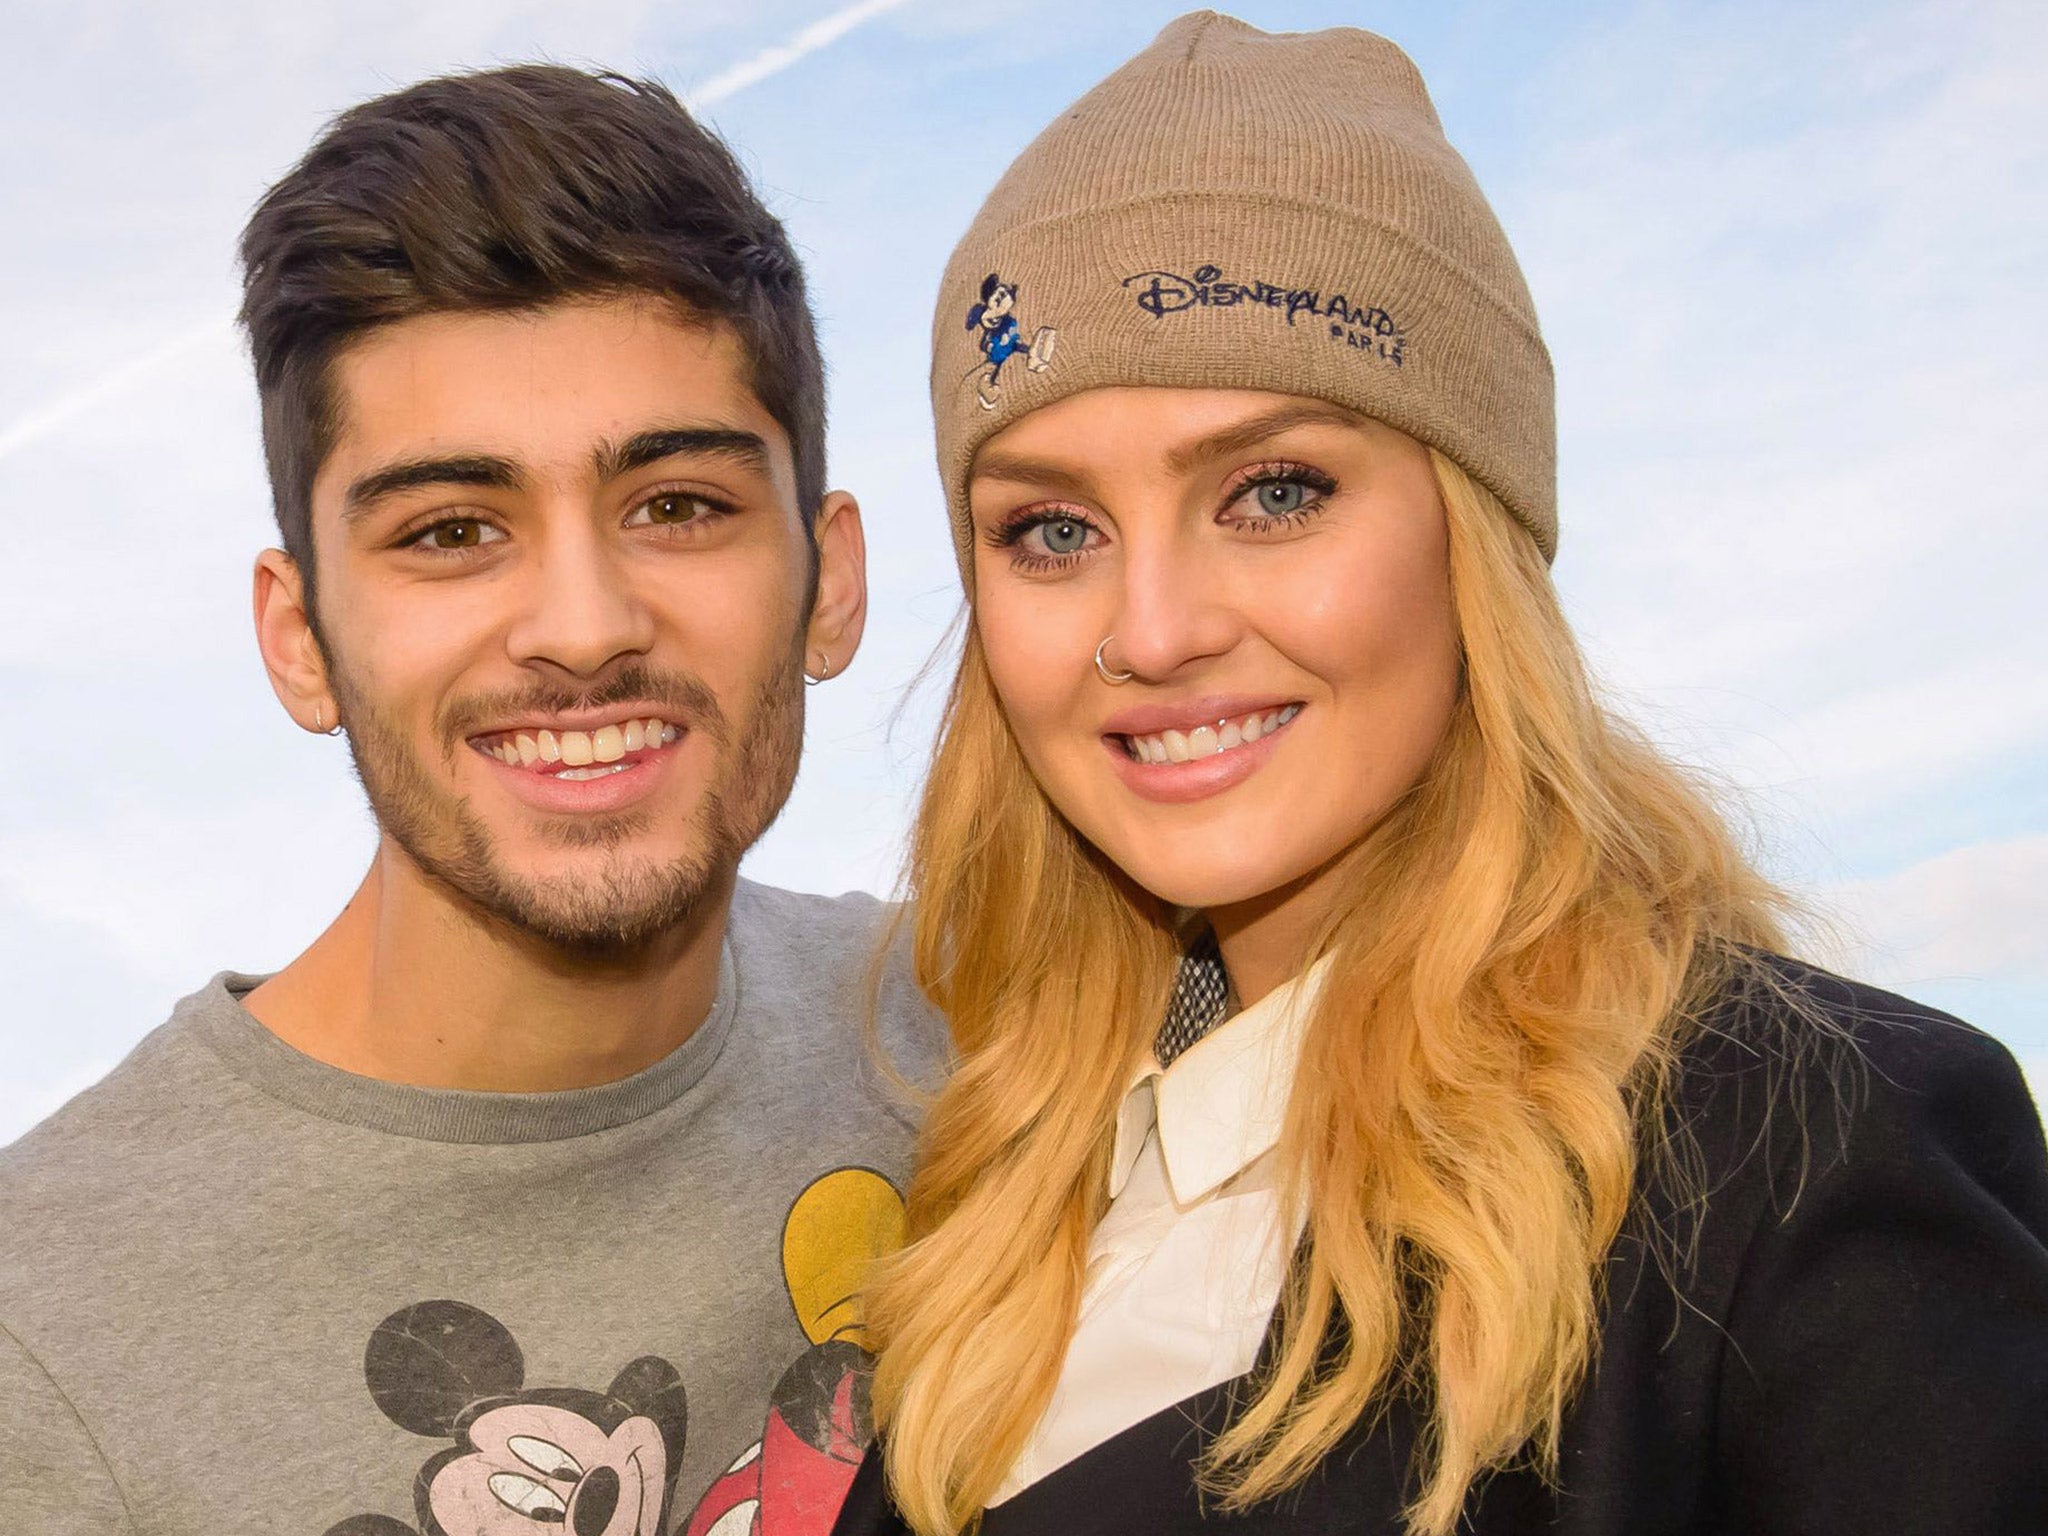 Zayn got engaged to Perrie Edwards, a singer with the group Little Mix, in August 2013